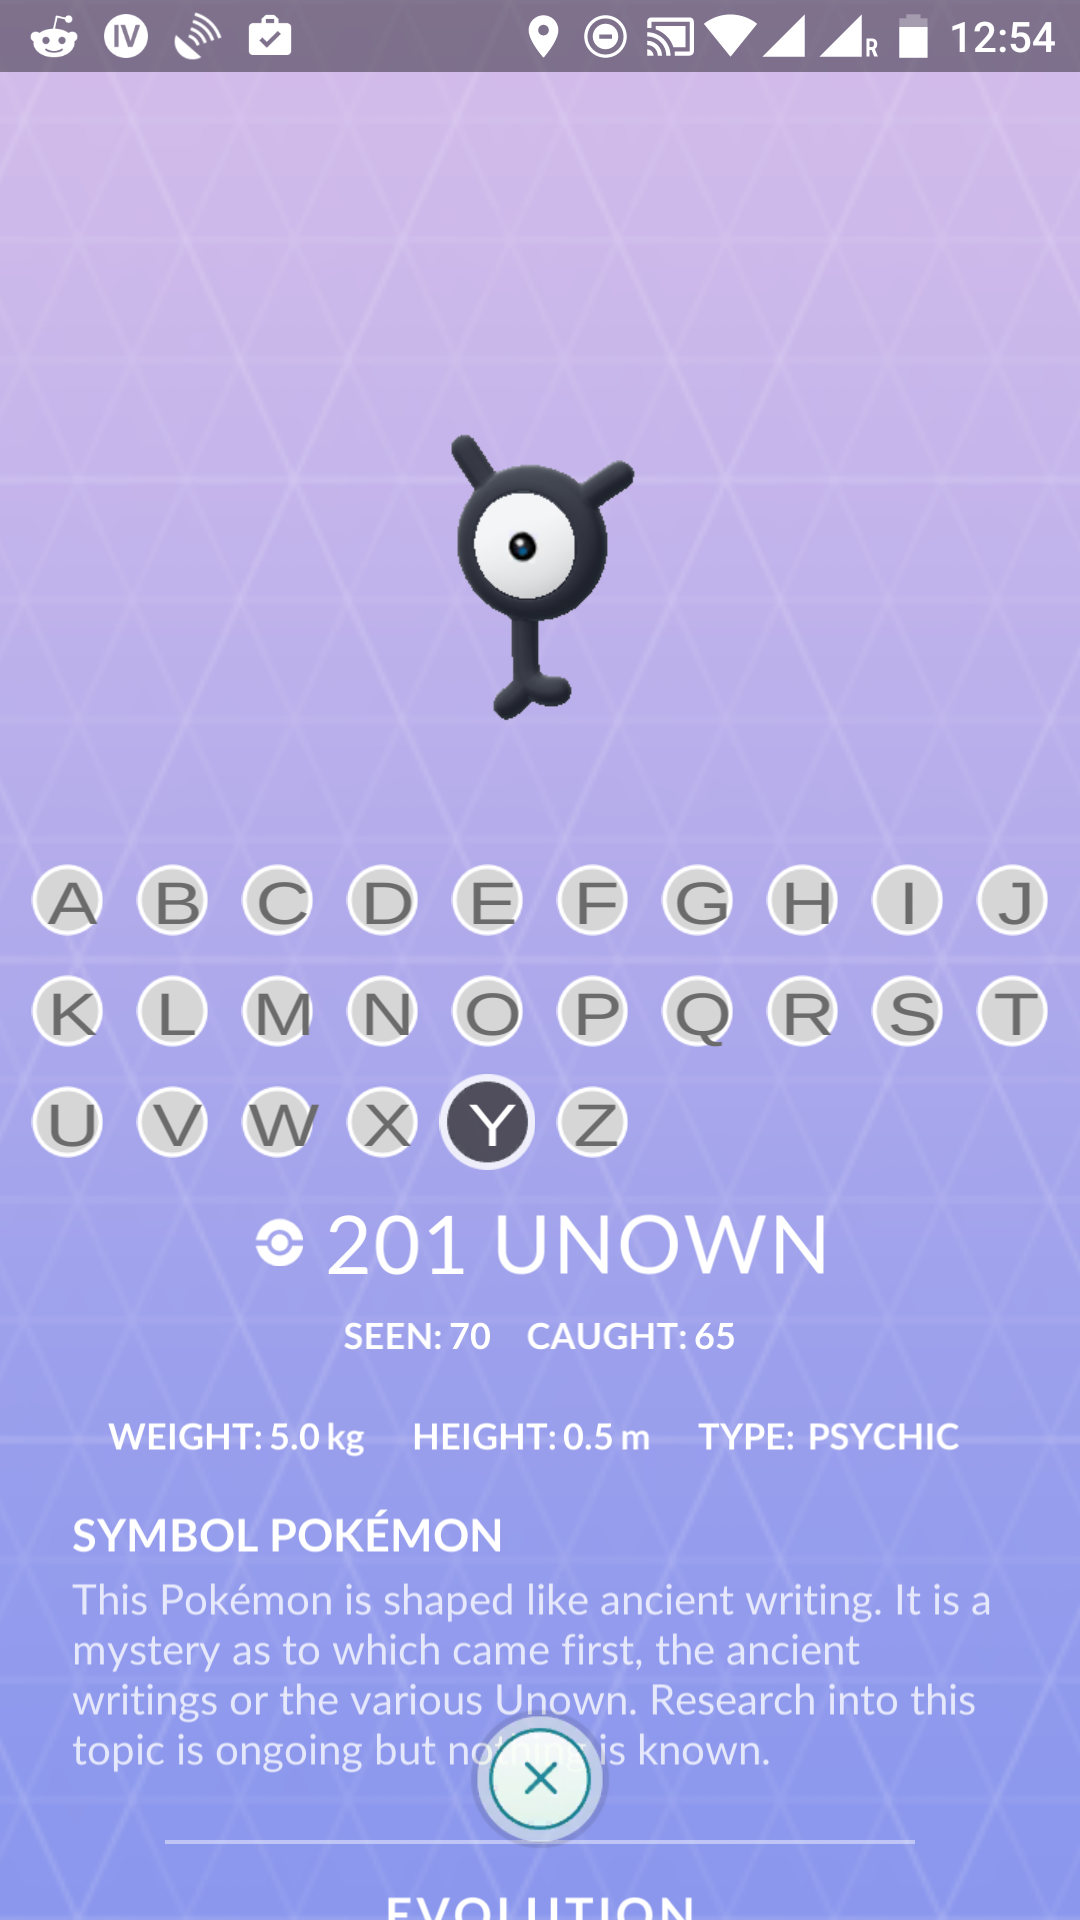 Also requested by @eadgarc ; an Unown checklist! 🤗🧡 #pokemon